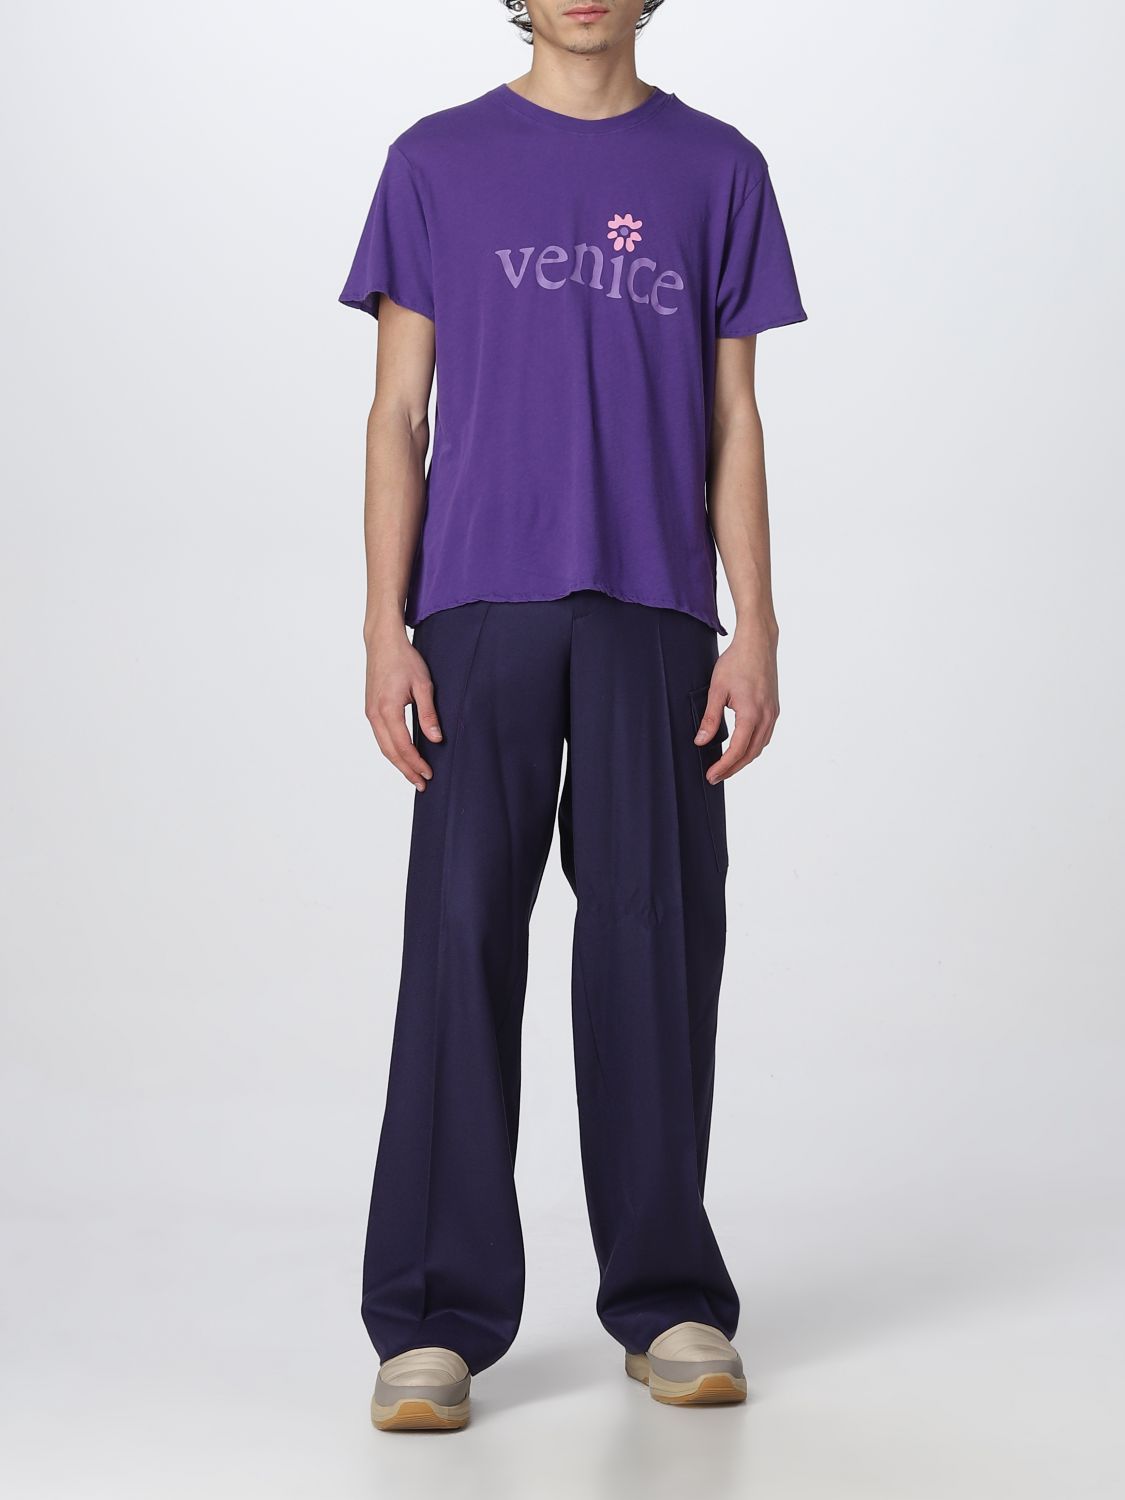 T-shirt Erl: T-shirt Erl con stampa venice viola 2